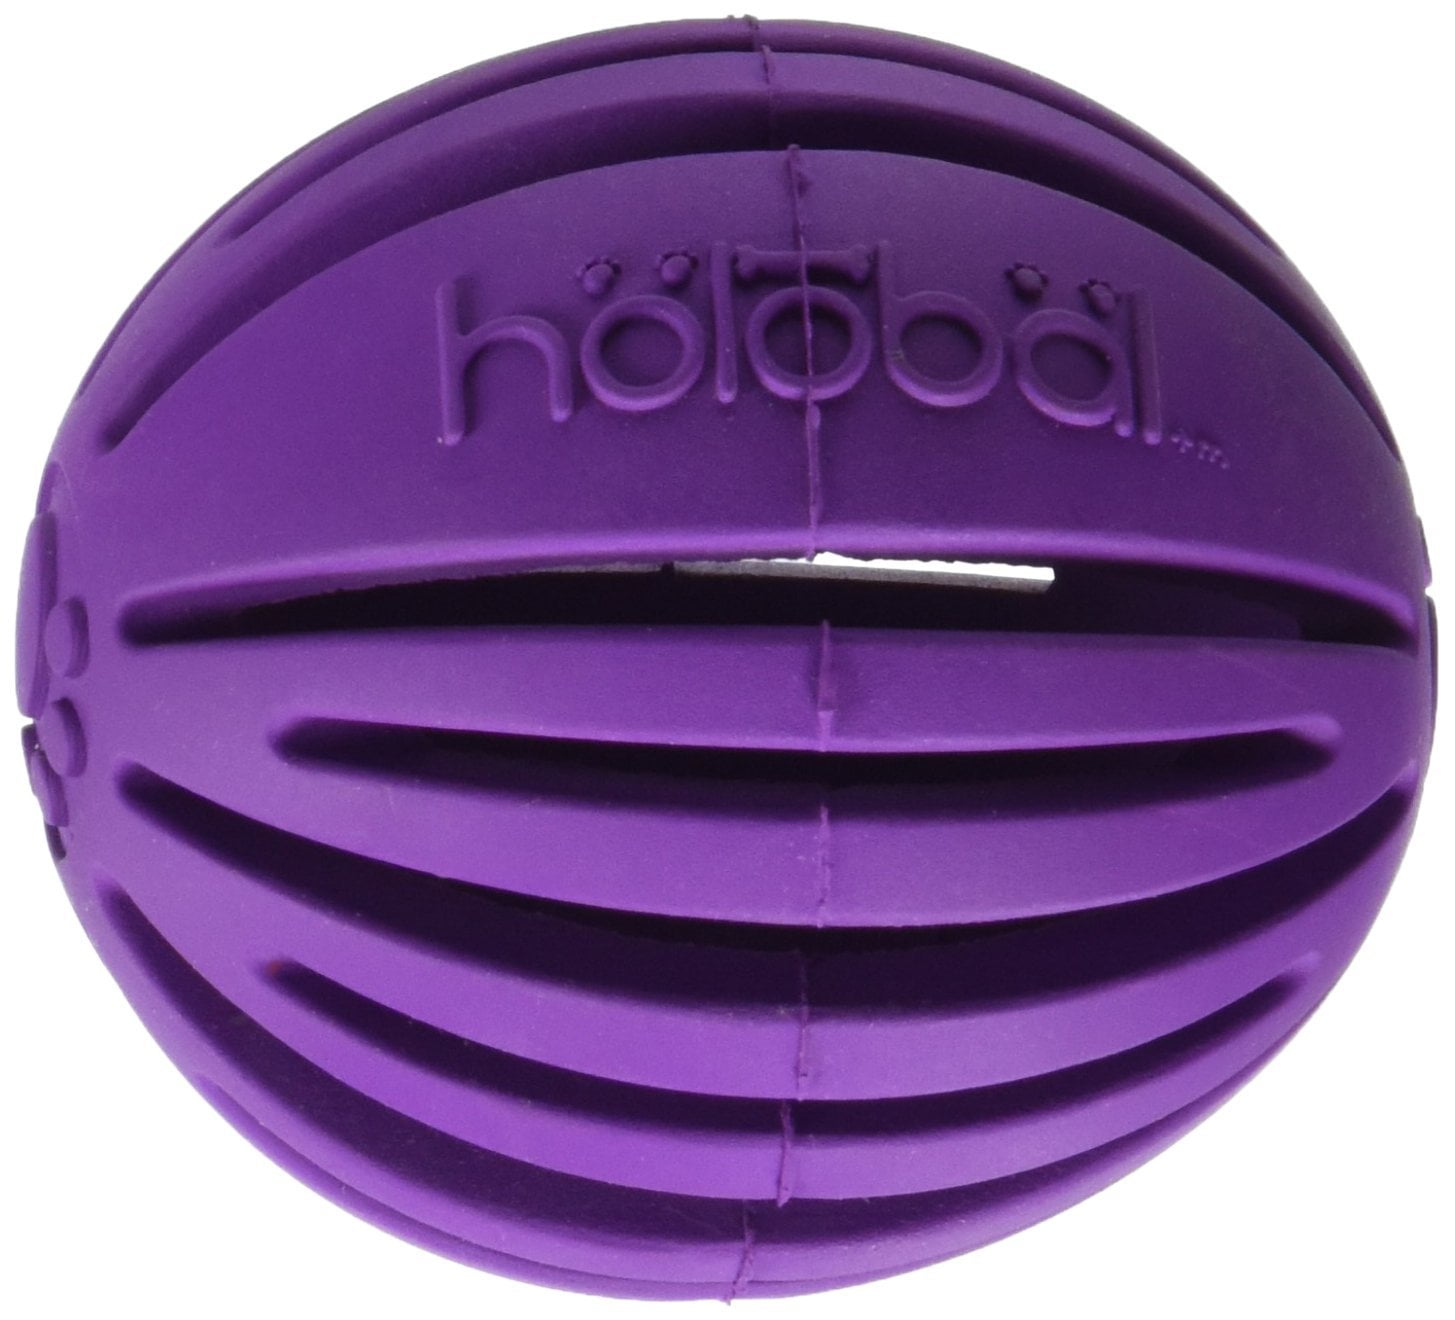 NEW Blue Green or Purple Holobal Football Treat Dispensing Dog Toy by Petprojekt 